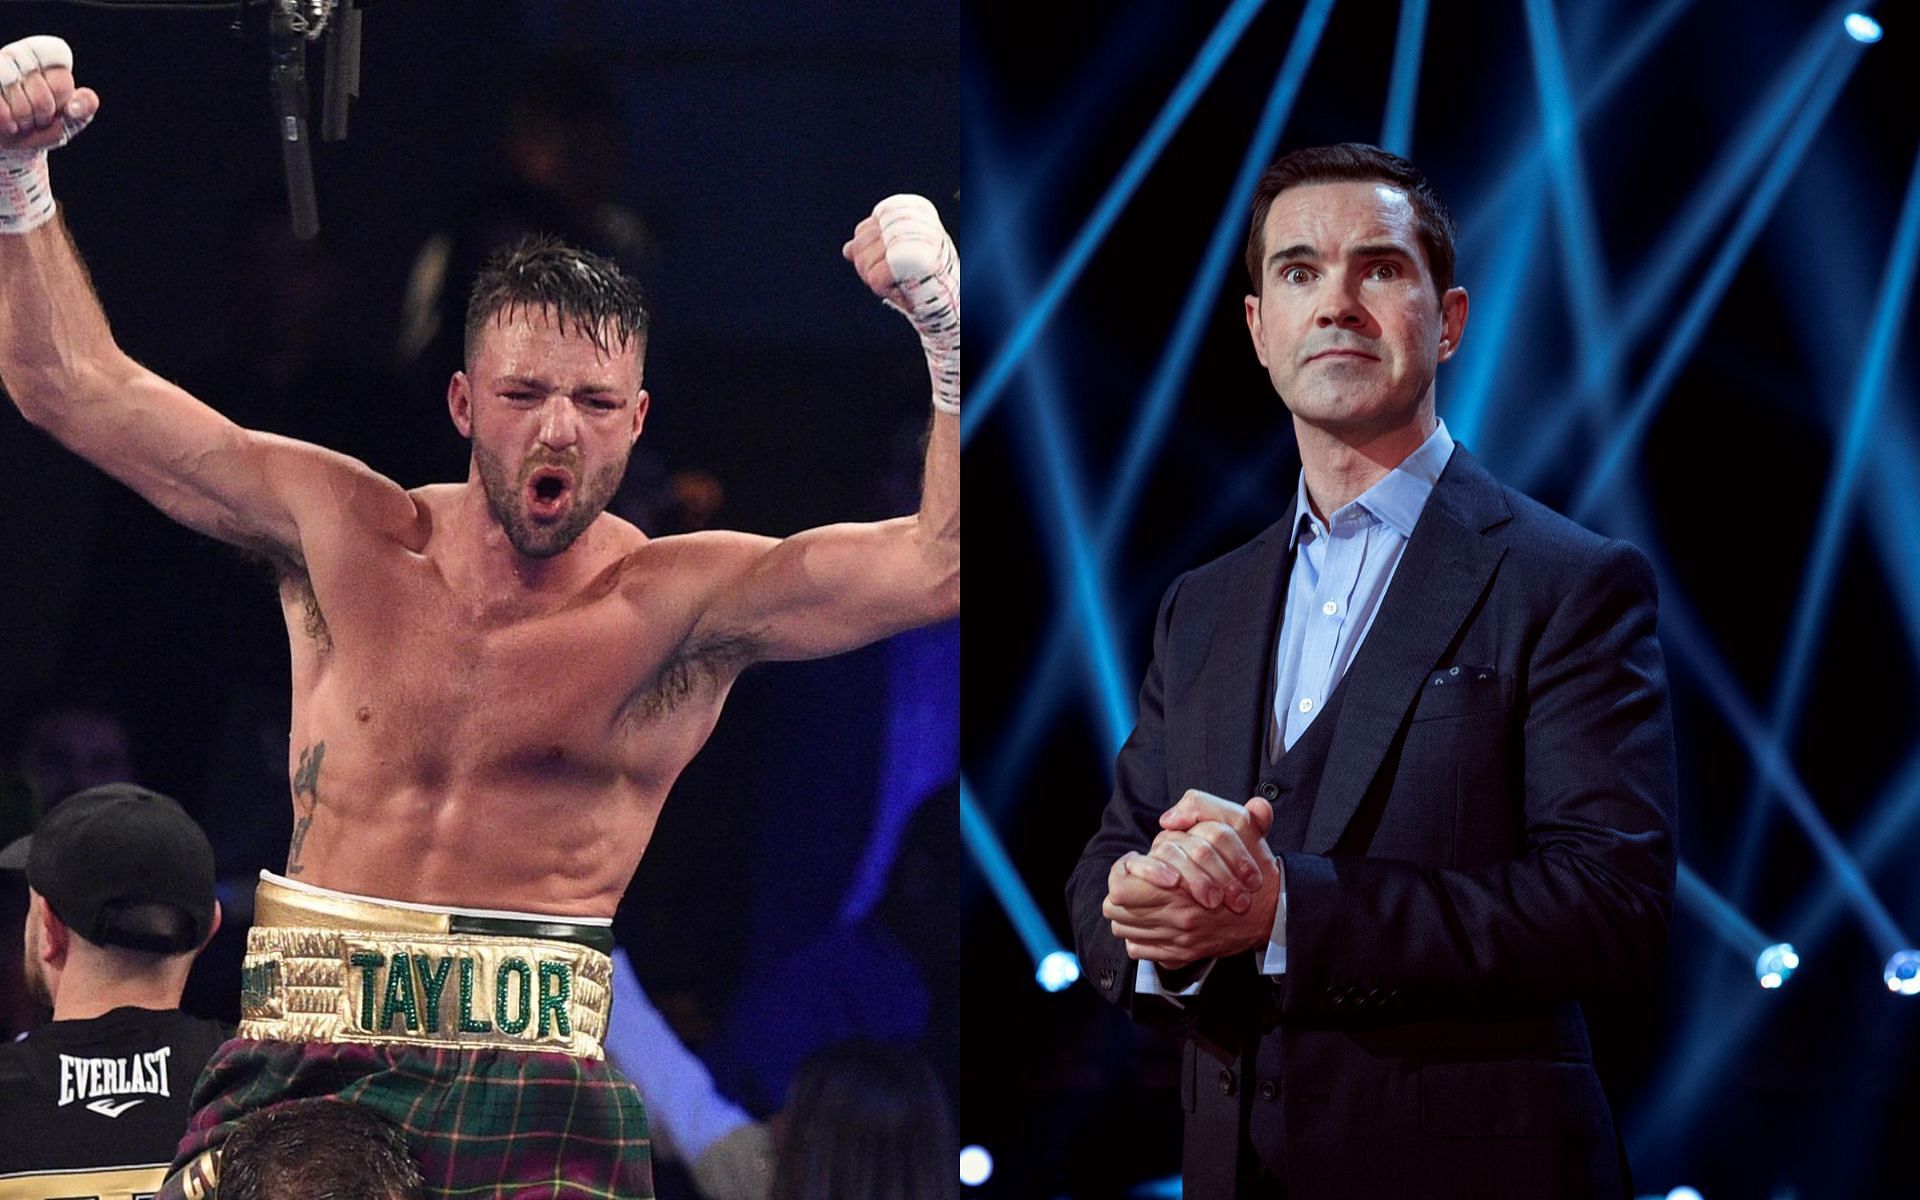 Josh Taylor (left), and Jimmy Carr (right)